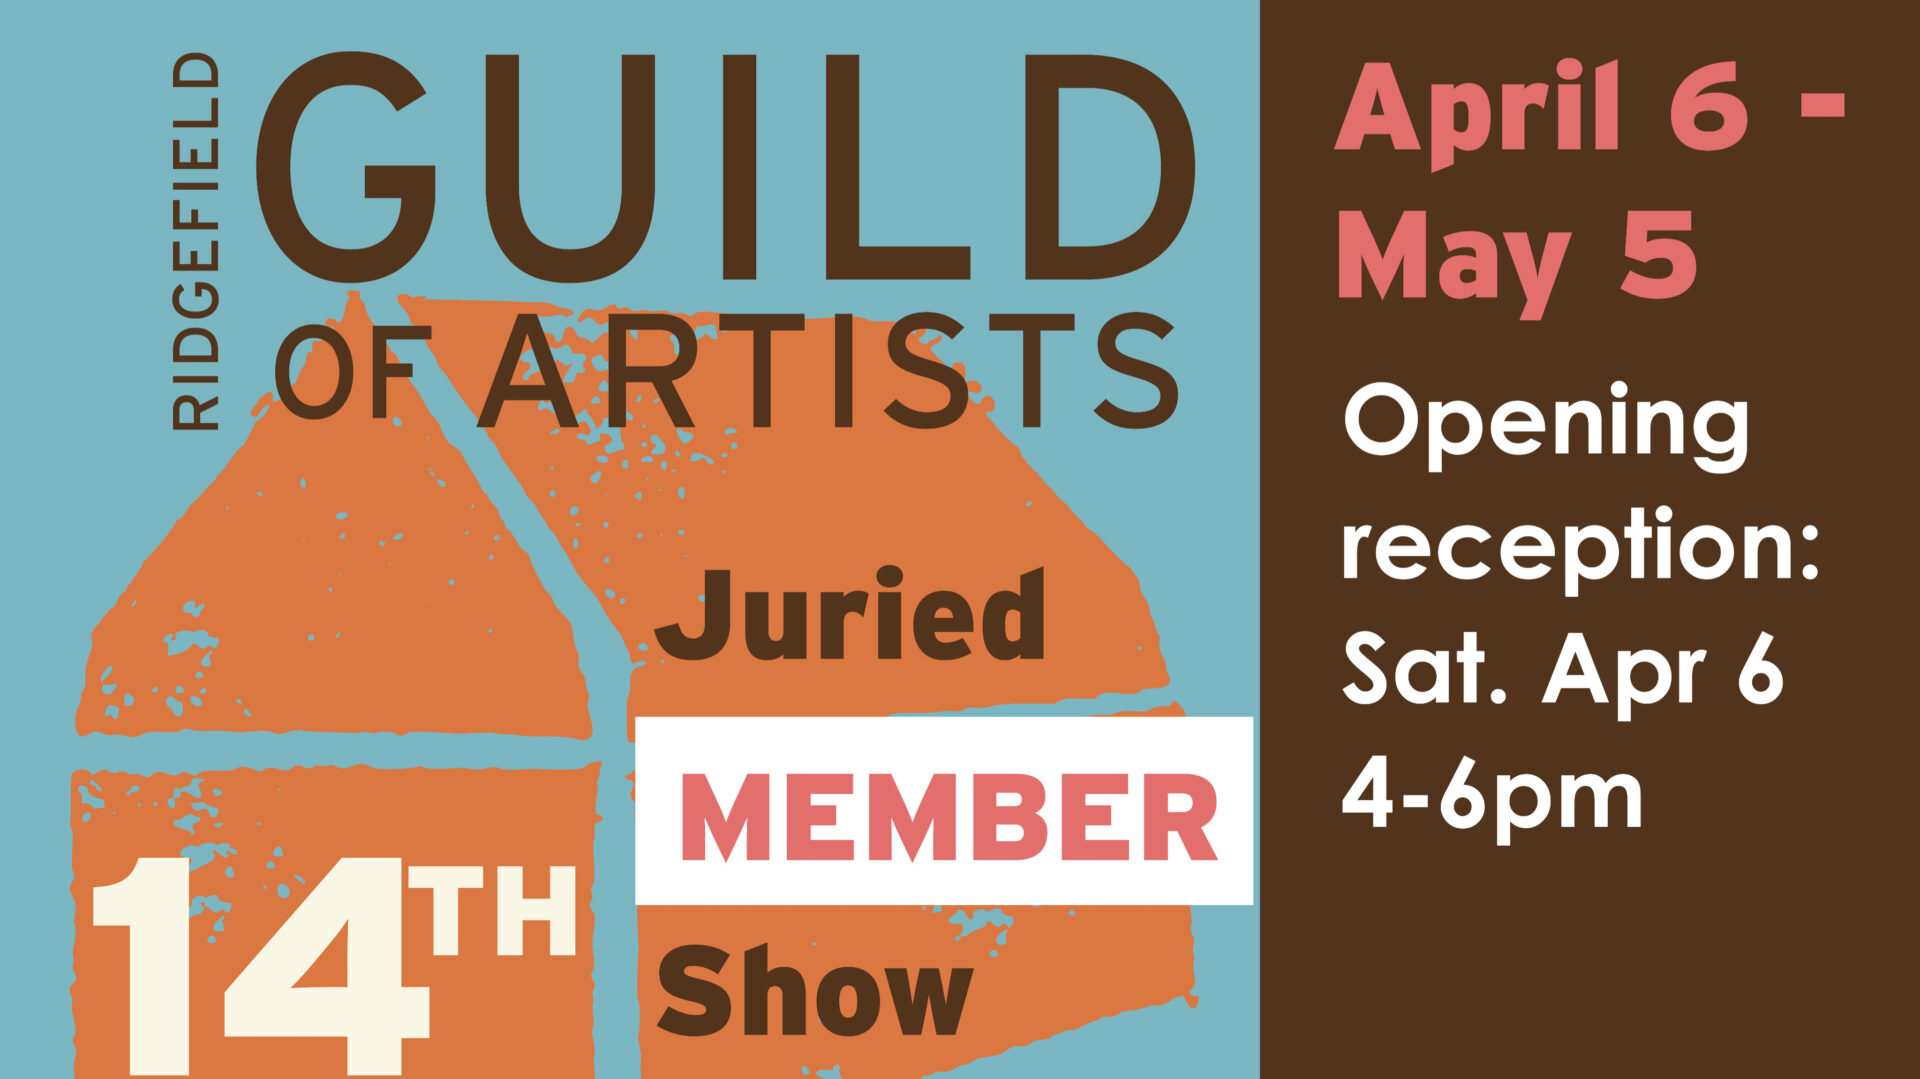 Ridgefield Guild of Artists’ 14th Juried Member Show Walk and Talk Sunday, May 5 from 2 to 4pm